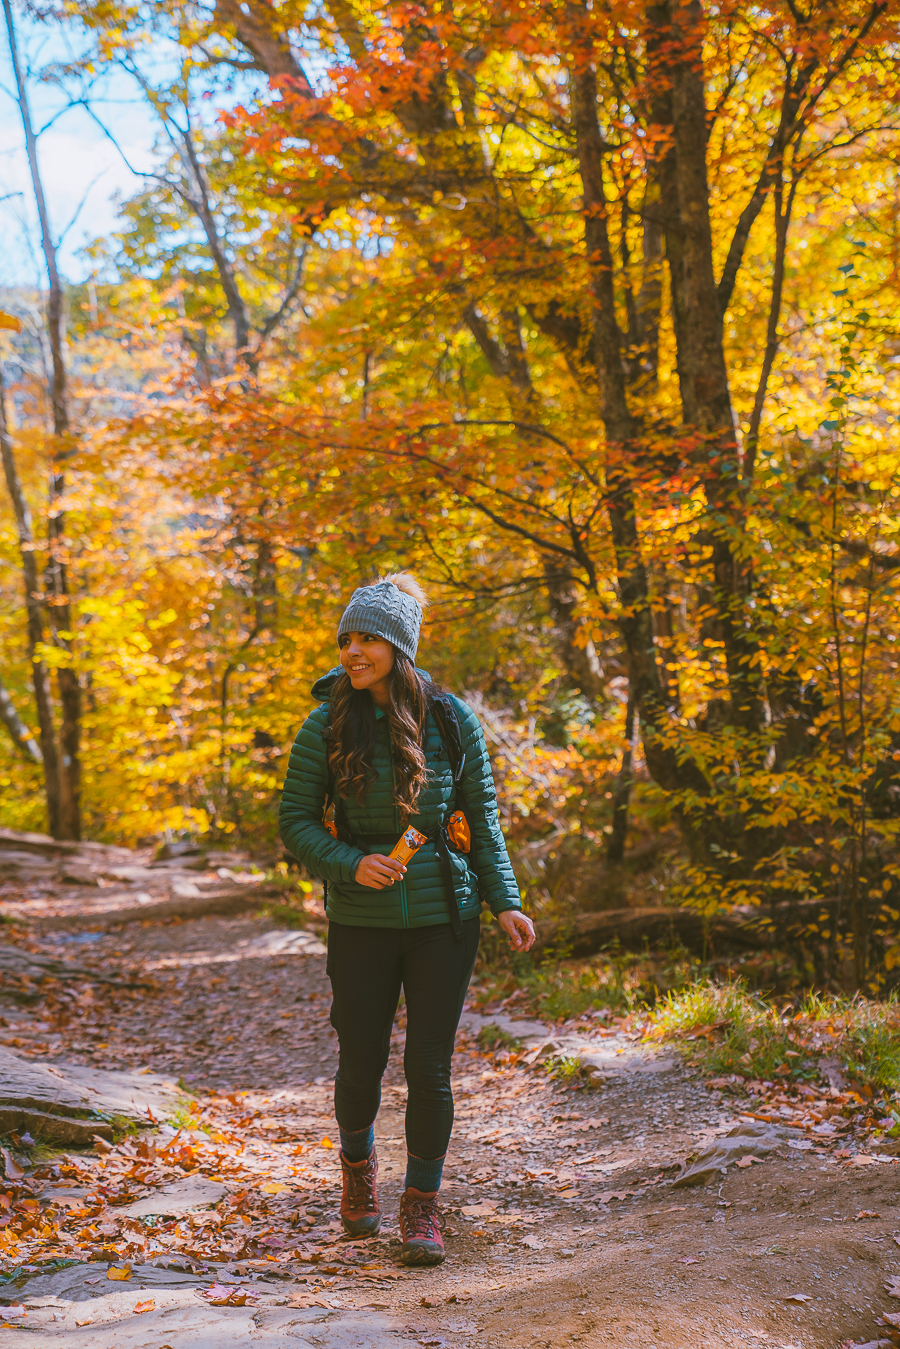 Stand Out While You Get Out: A Hiking Clothing Color Guide